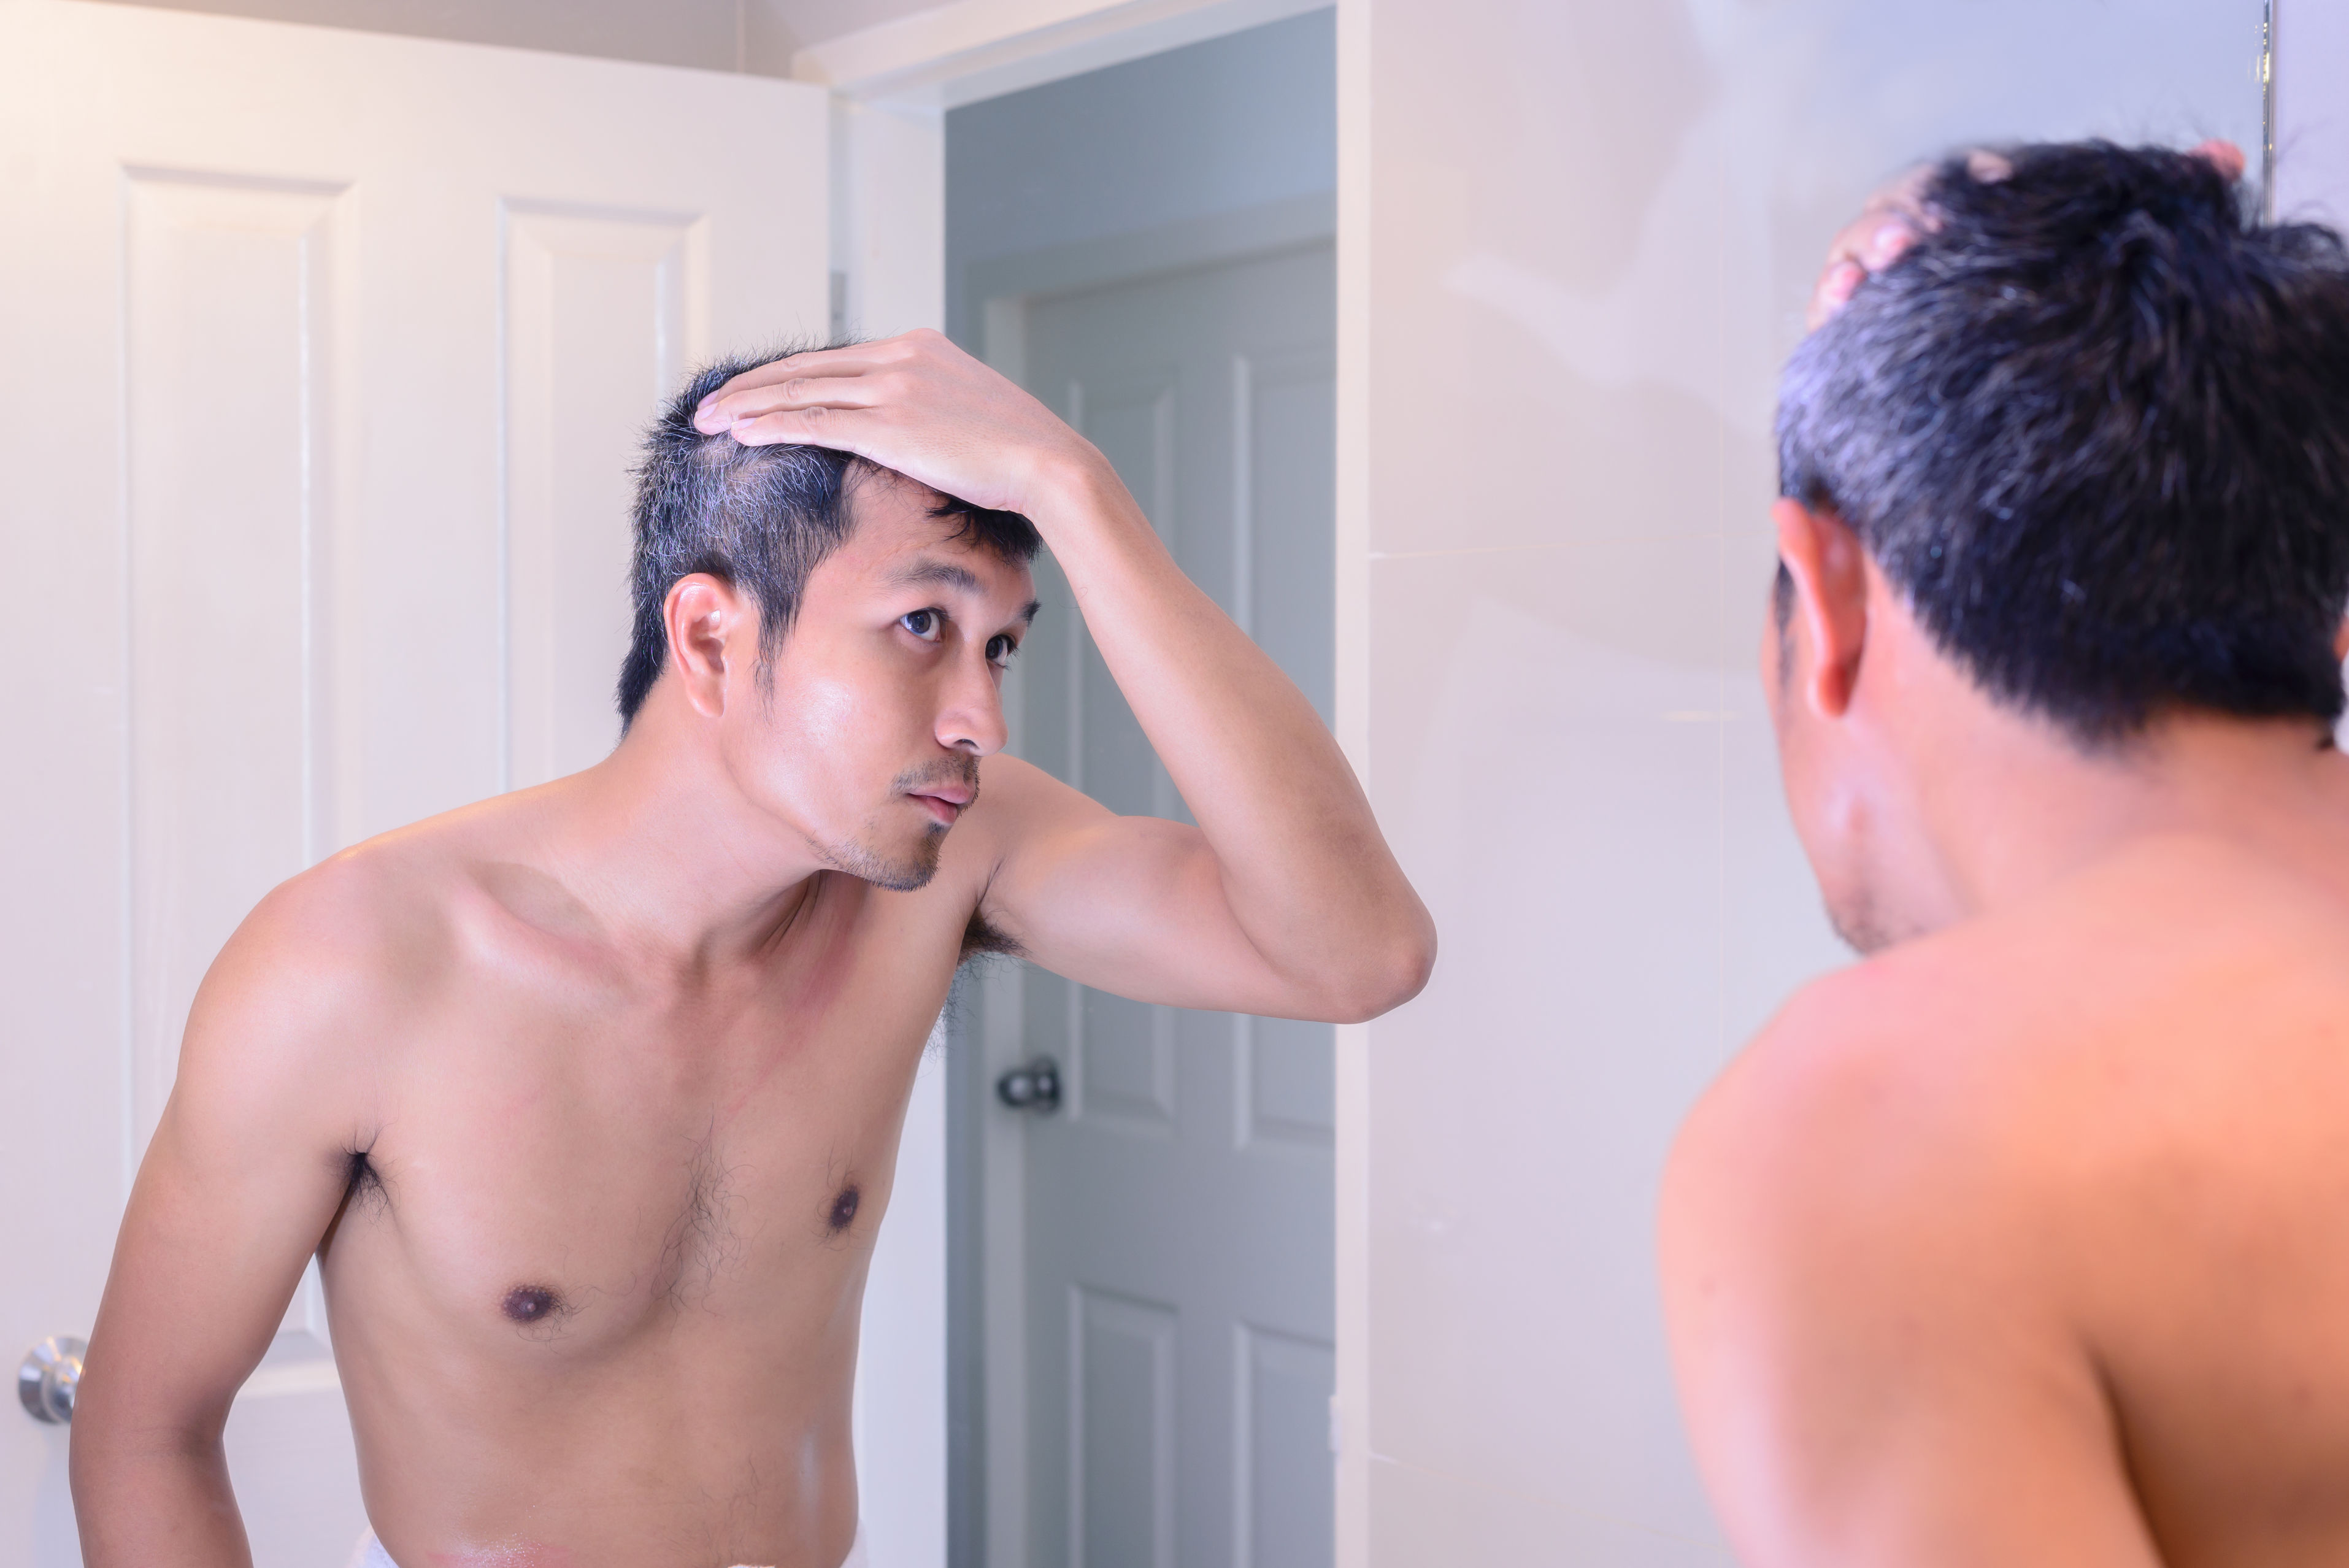 What Is Causing You To Lose Your Hair? – By The Knightsbridge Clinic